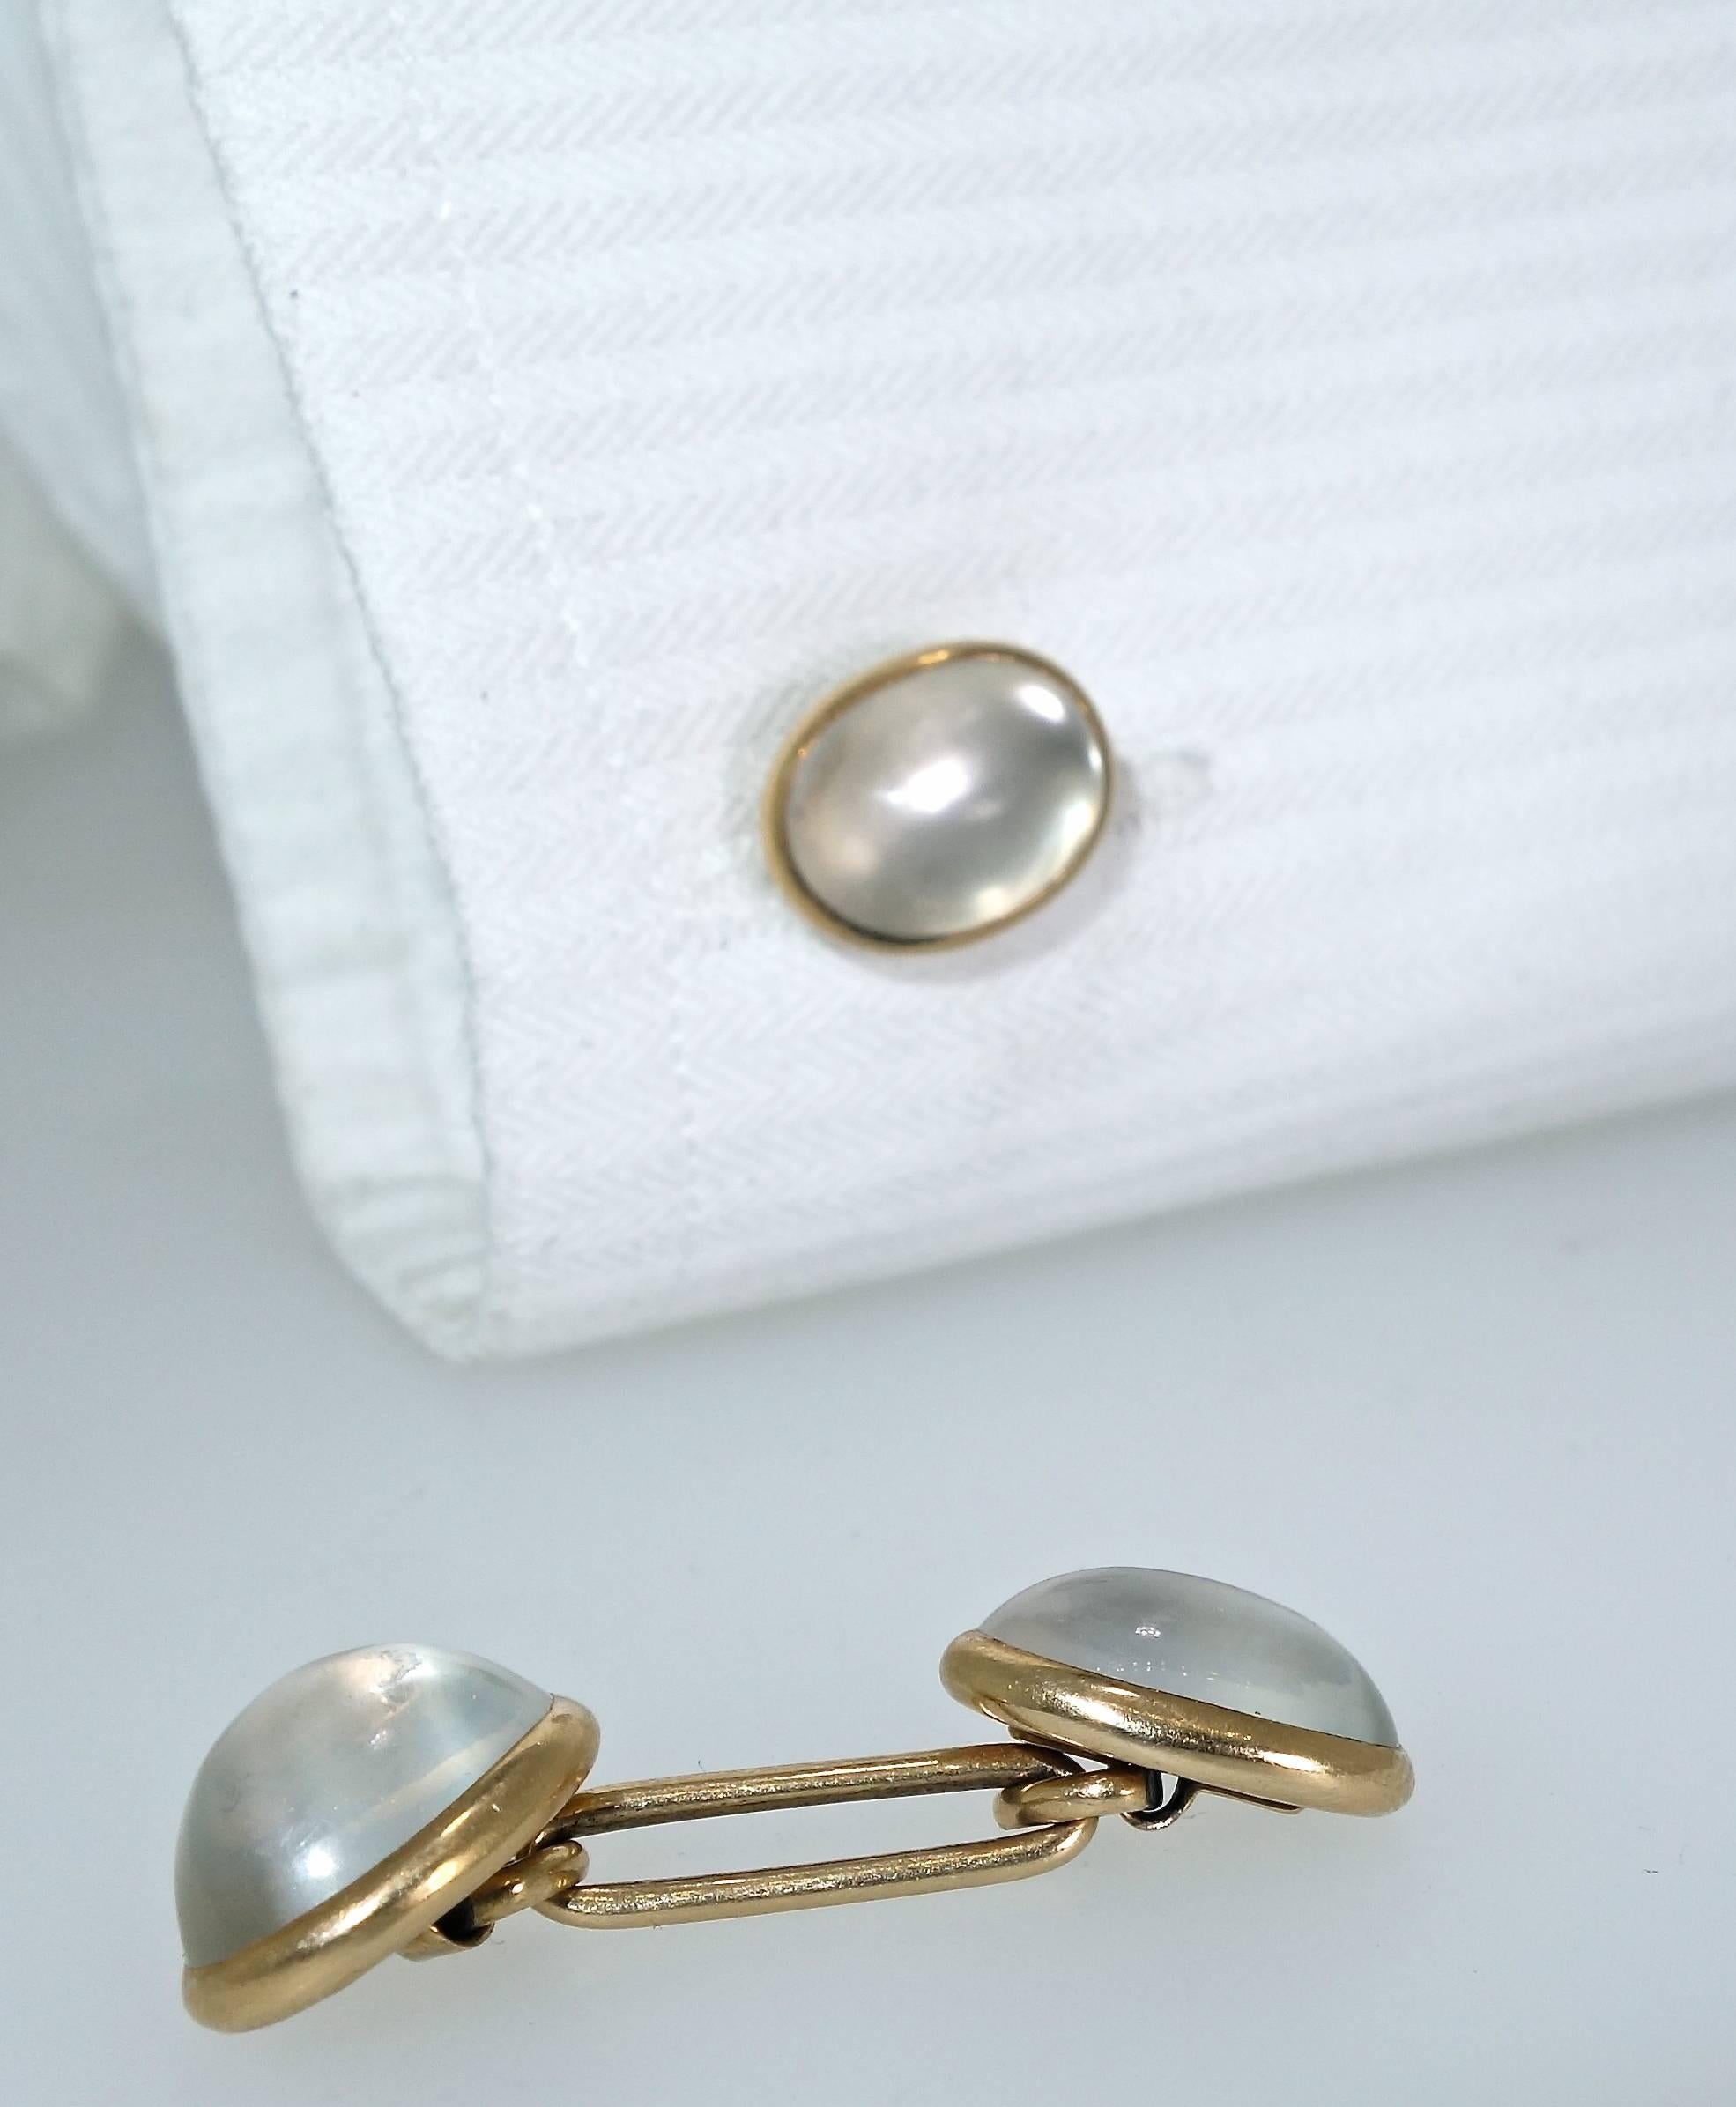 Antique cufflinks possessing four oval moonstones set in gold by the famous American firm Black, Star & Frost.  21.25 grams, circa 1903.